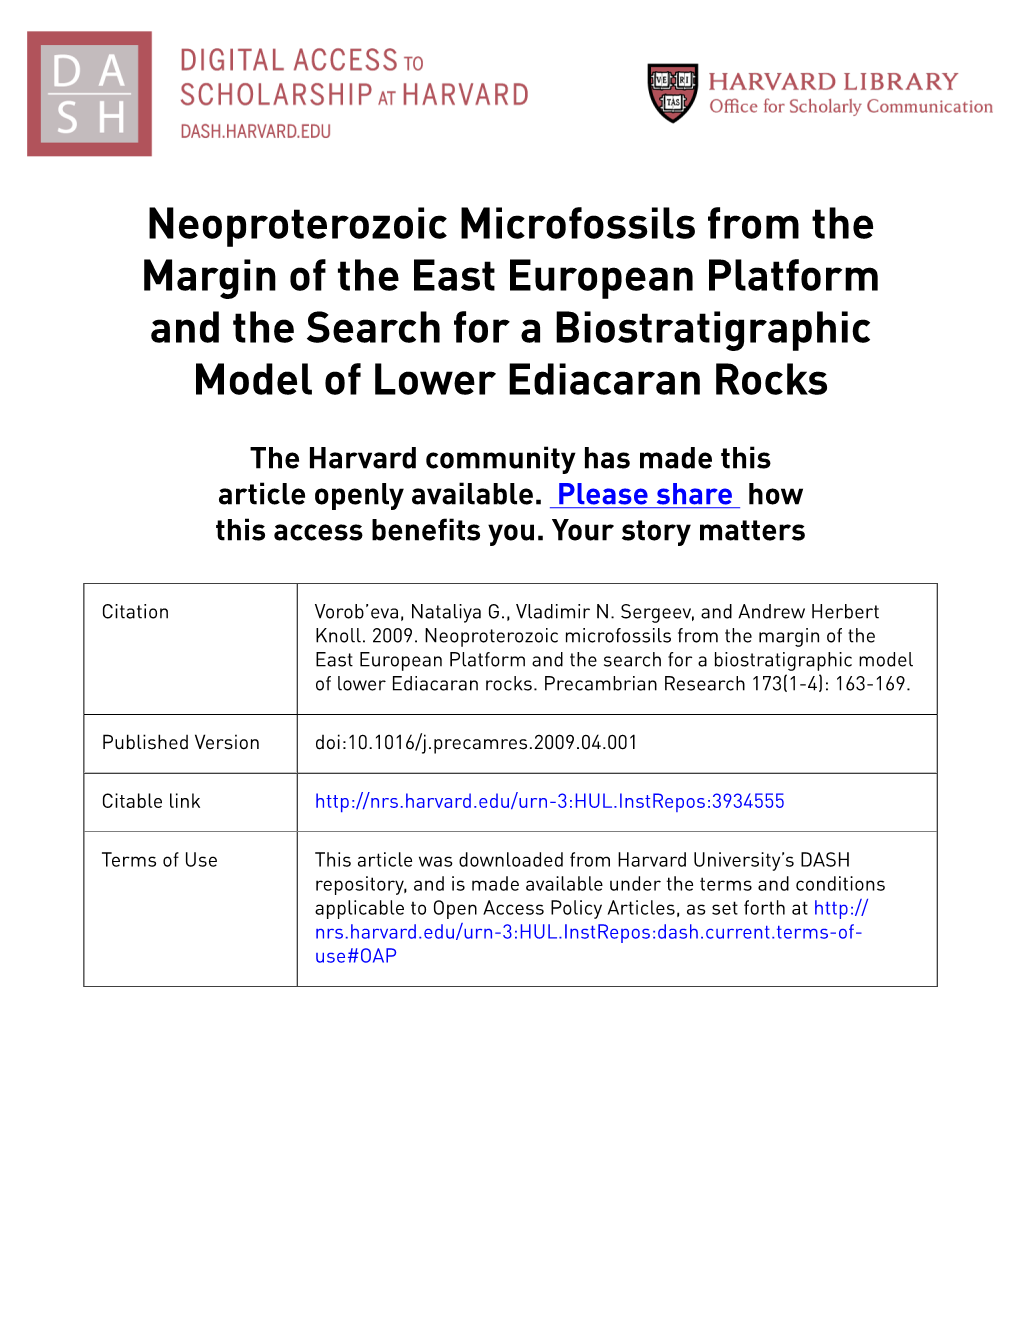 Neoproterozoic Microfossils from the Margin of the East European Platform and the Search for a Biostratigraphic Model of Lower Ediacaran Rocks